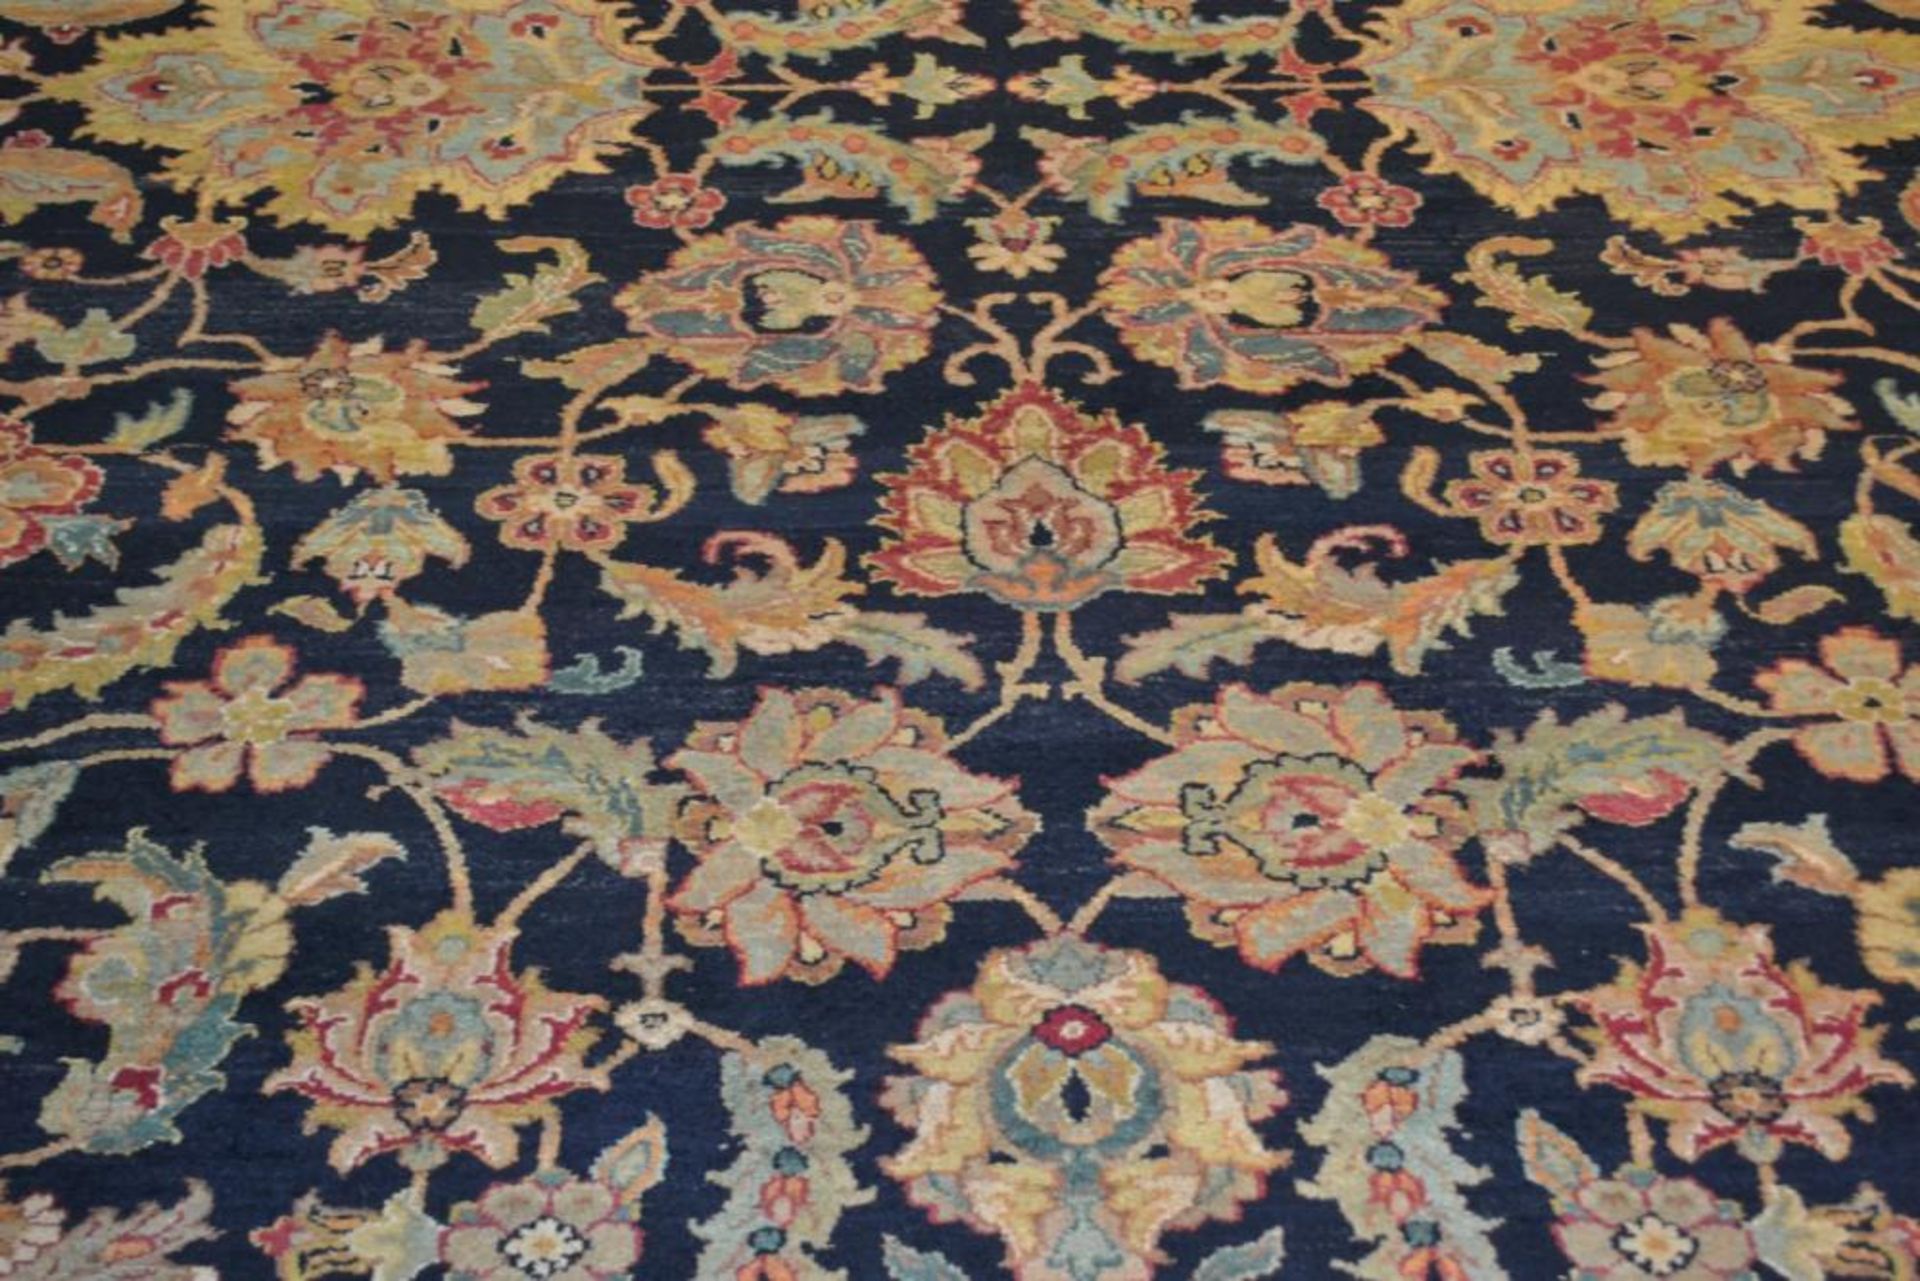 1 x Black Jaipur Handwoven Carpet - Made From Vegetable Dyed Handspun Wool - Dimensions: 367x277cm - - Image 3 of 16